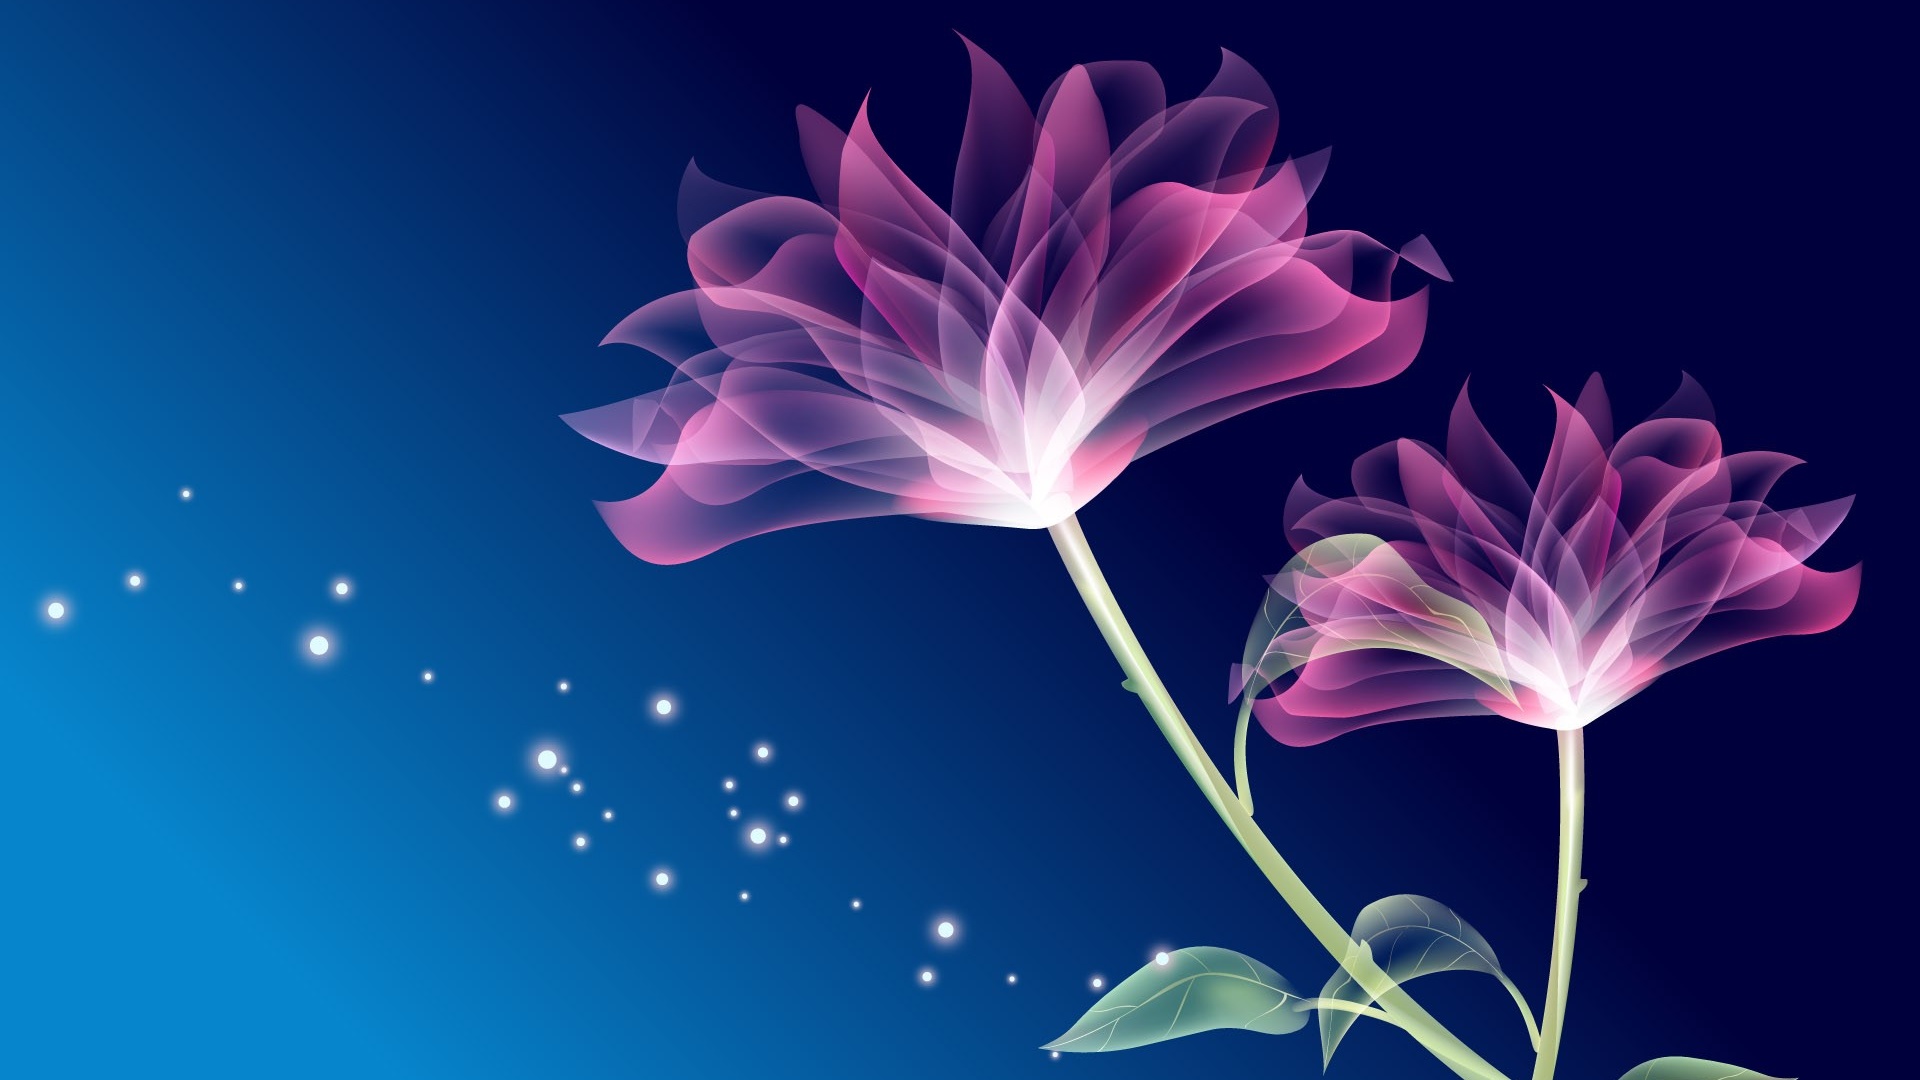 HD Magic Wallpapers and Photos HD Flowers Backgrounds